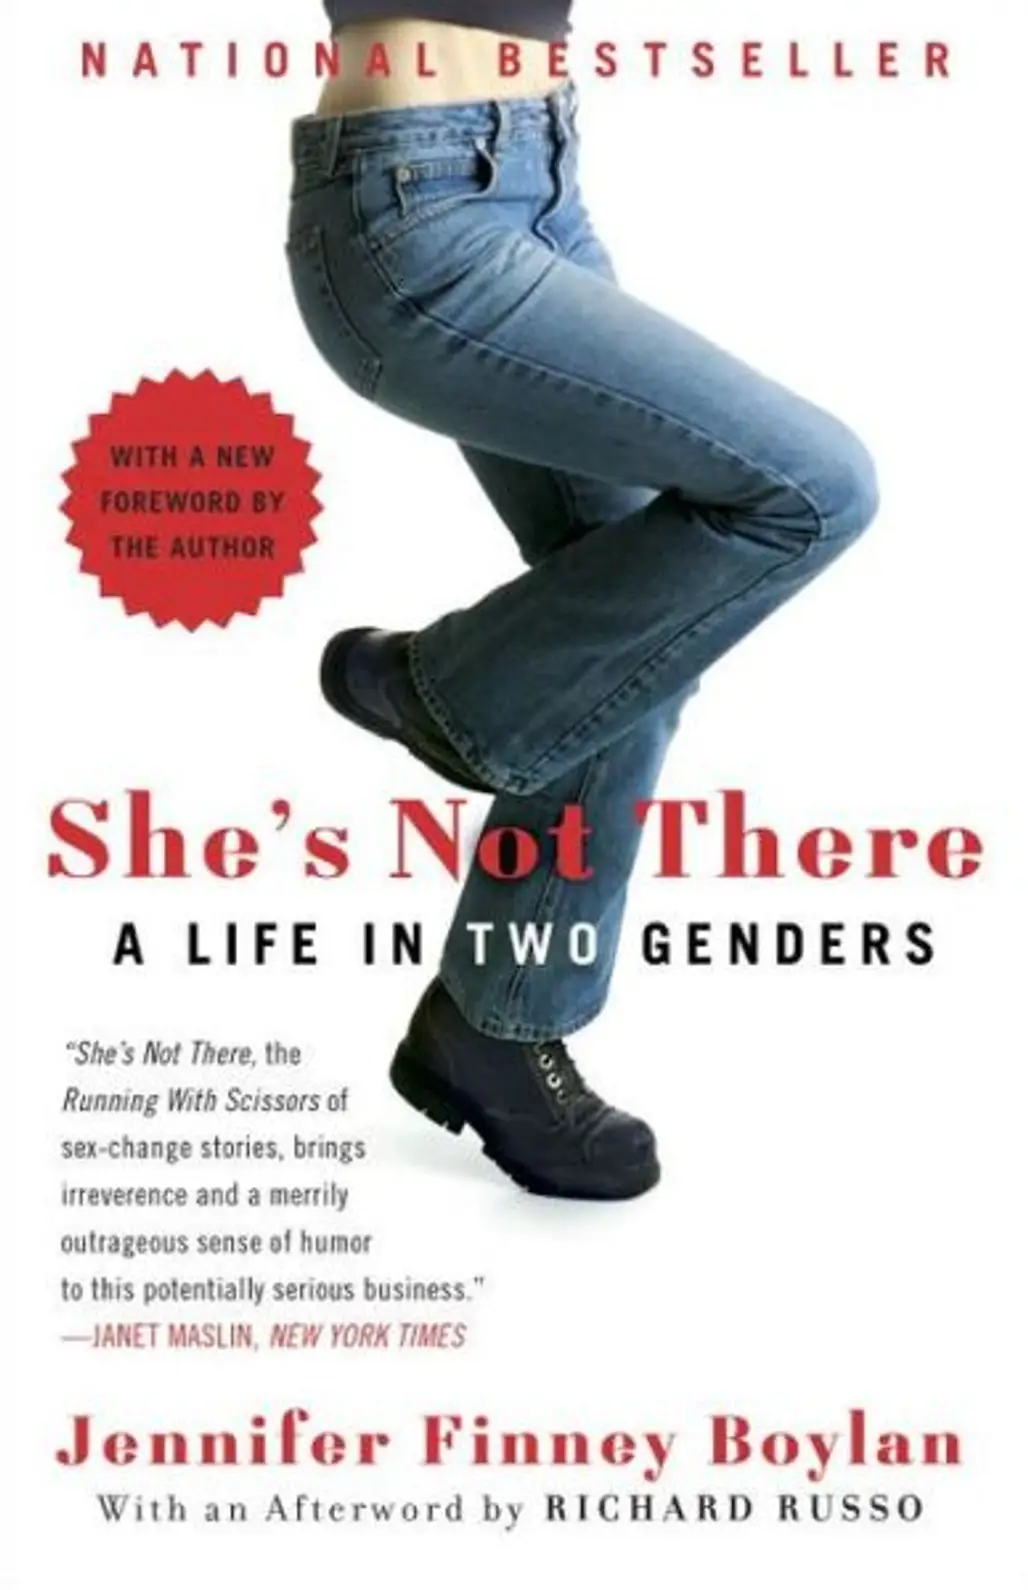 She's Not There: a Life in Two Genders by Jennifer Finney Boylan